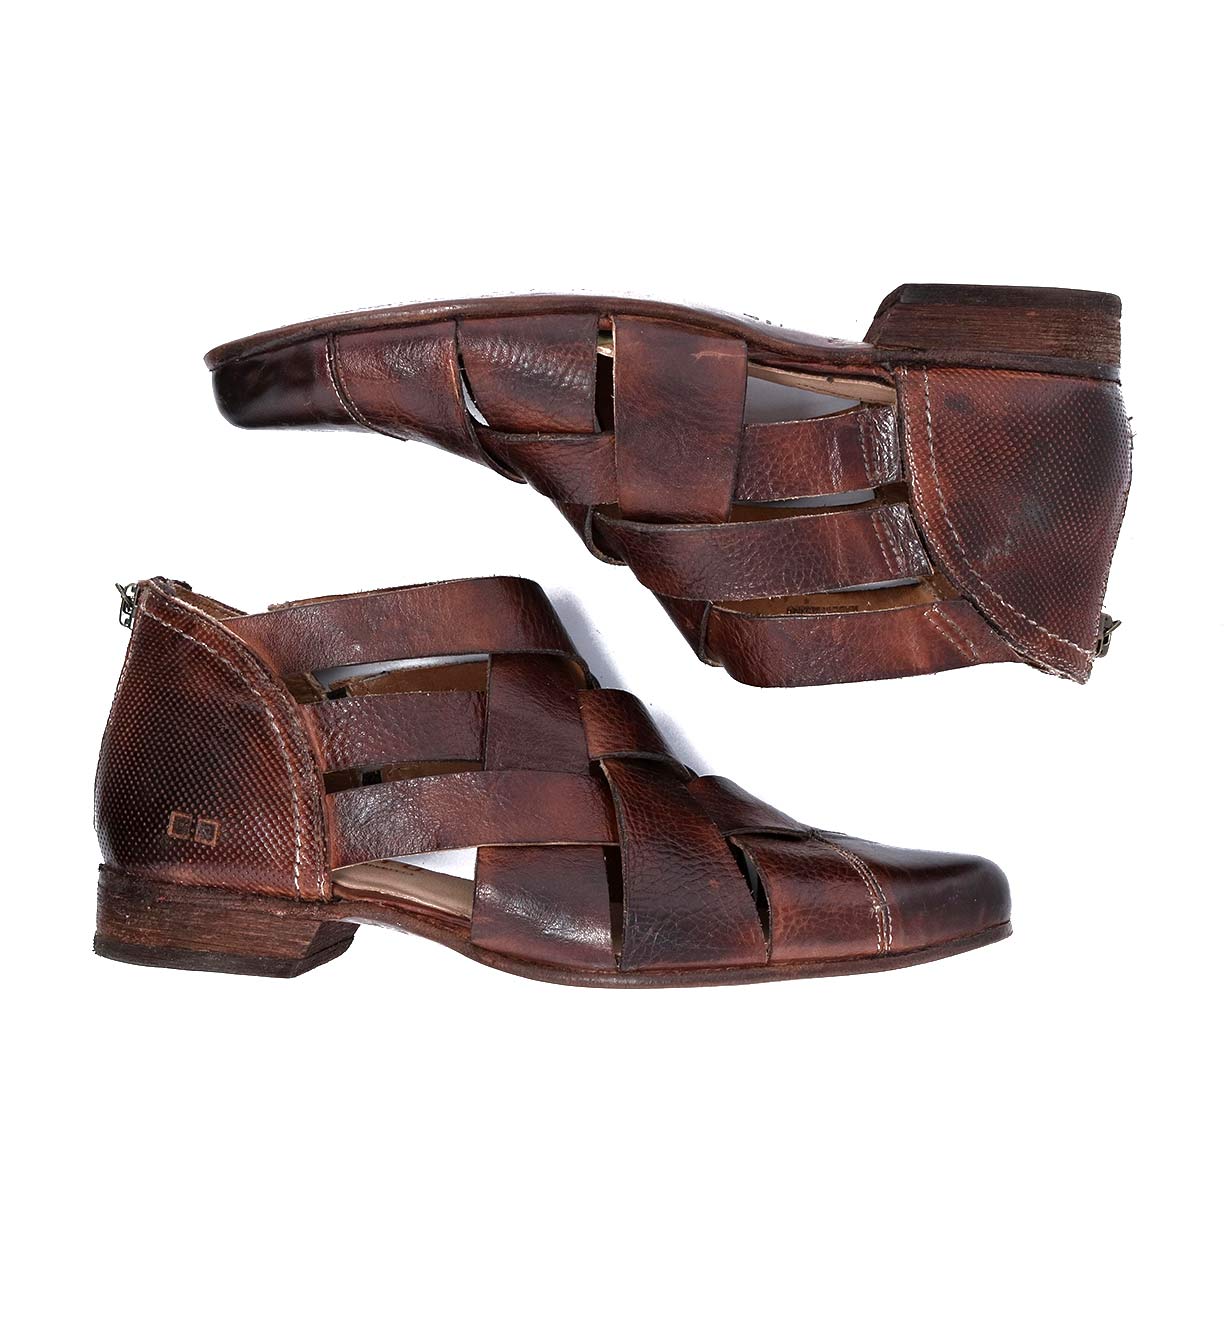 A pair of Bed Stu Brittany brown leather sandals with straps.